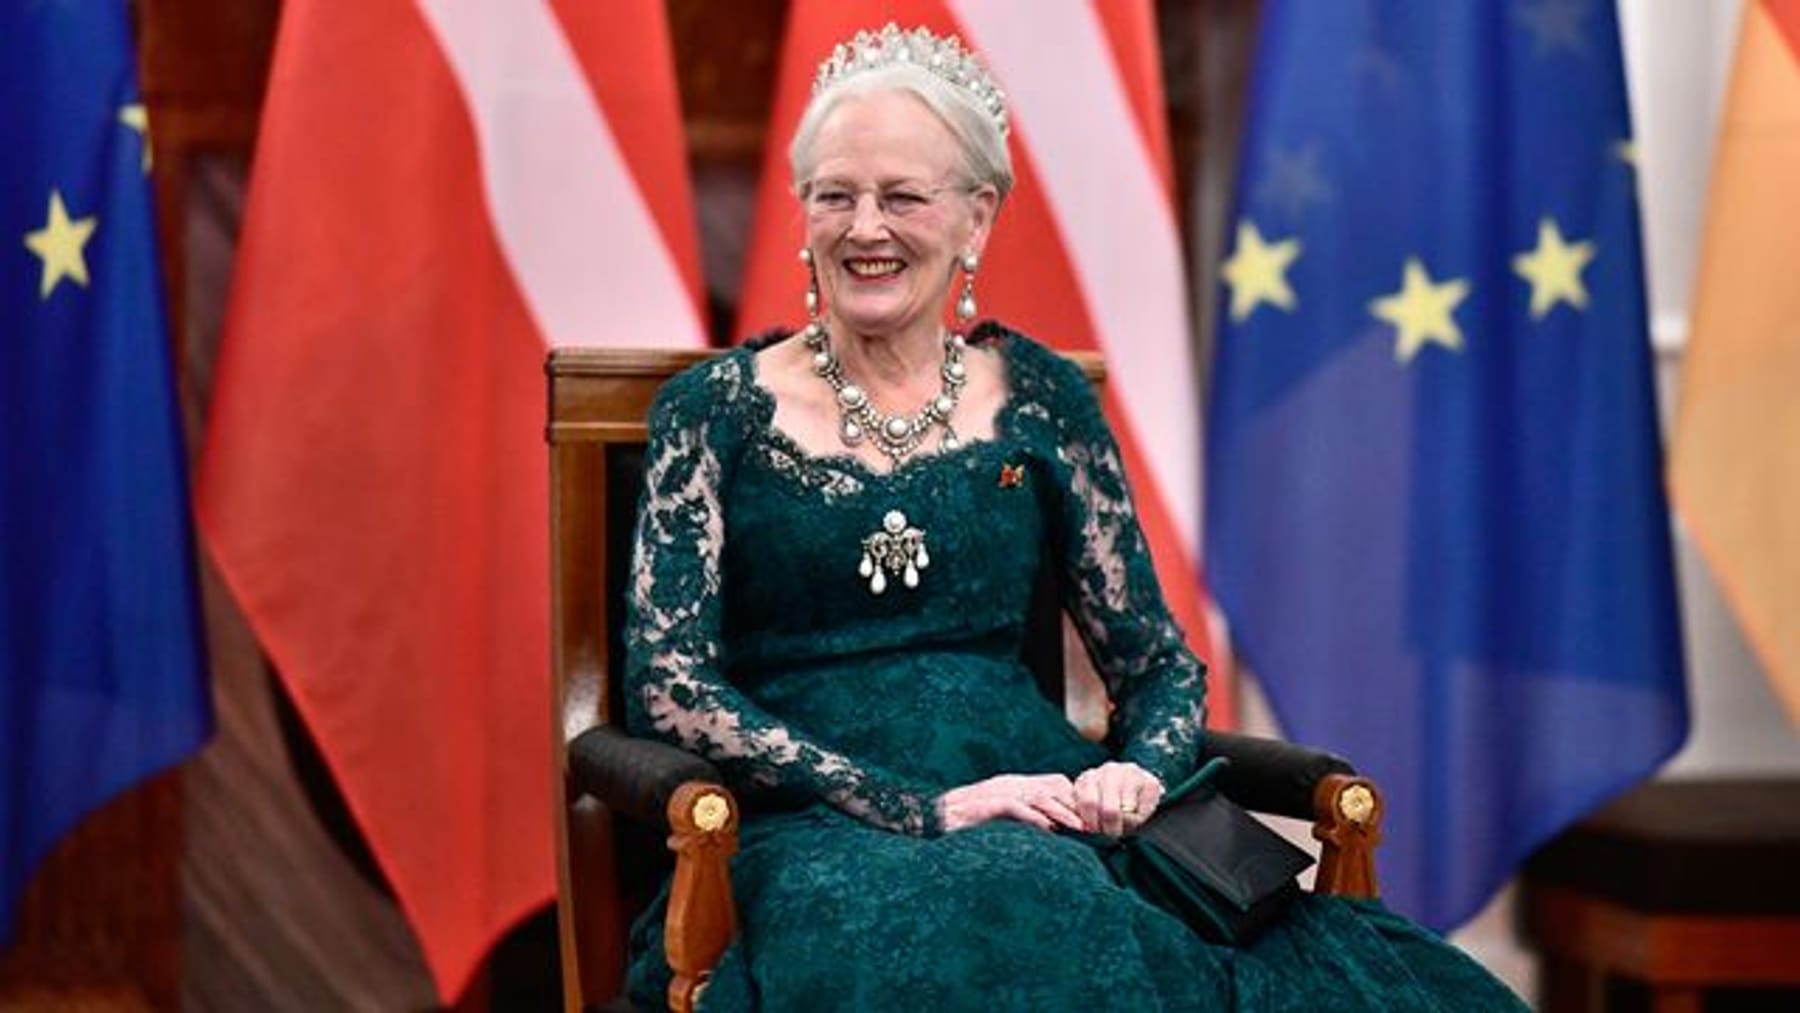 Royals: Ride on a roller coaster – Queen Margrethe celebrates her jubilee